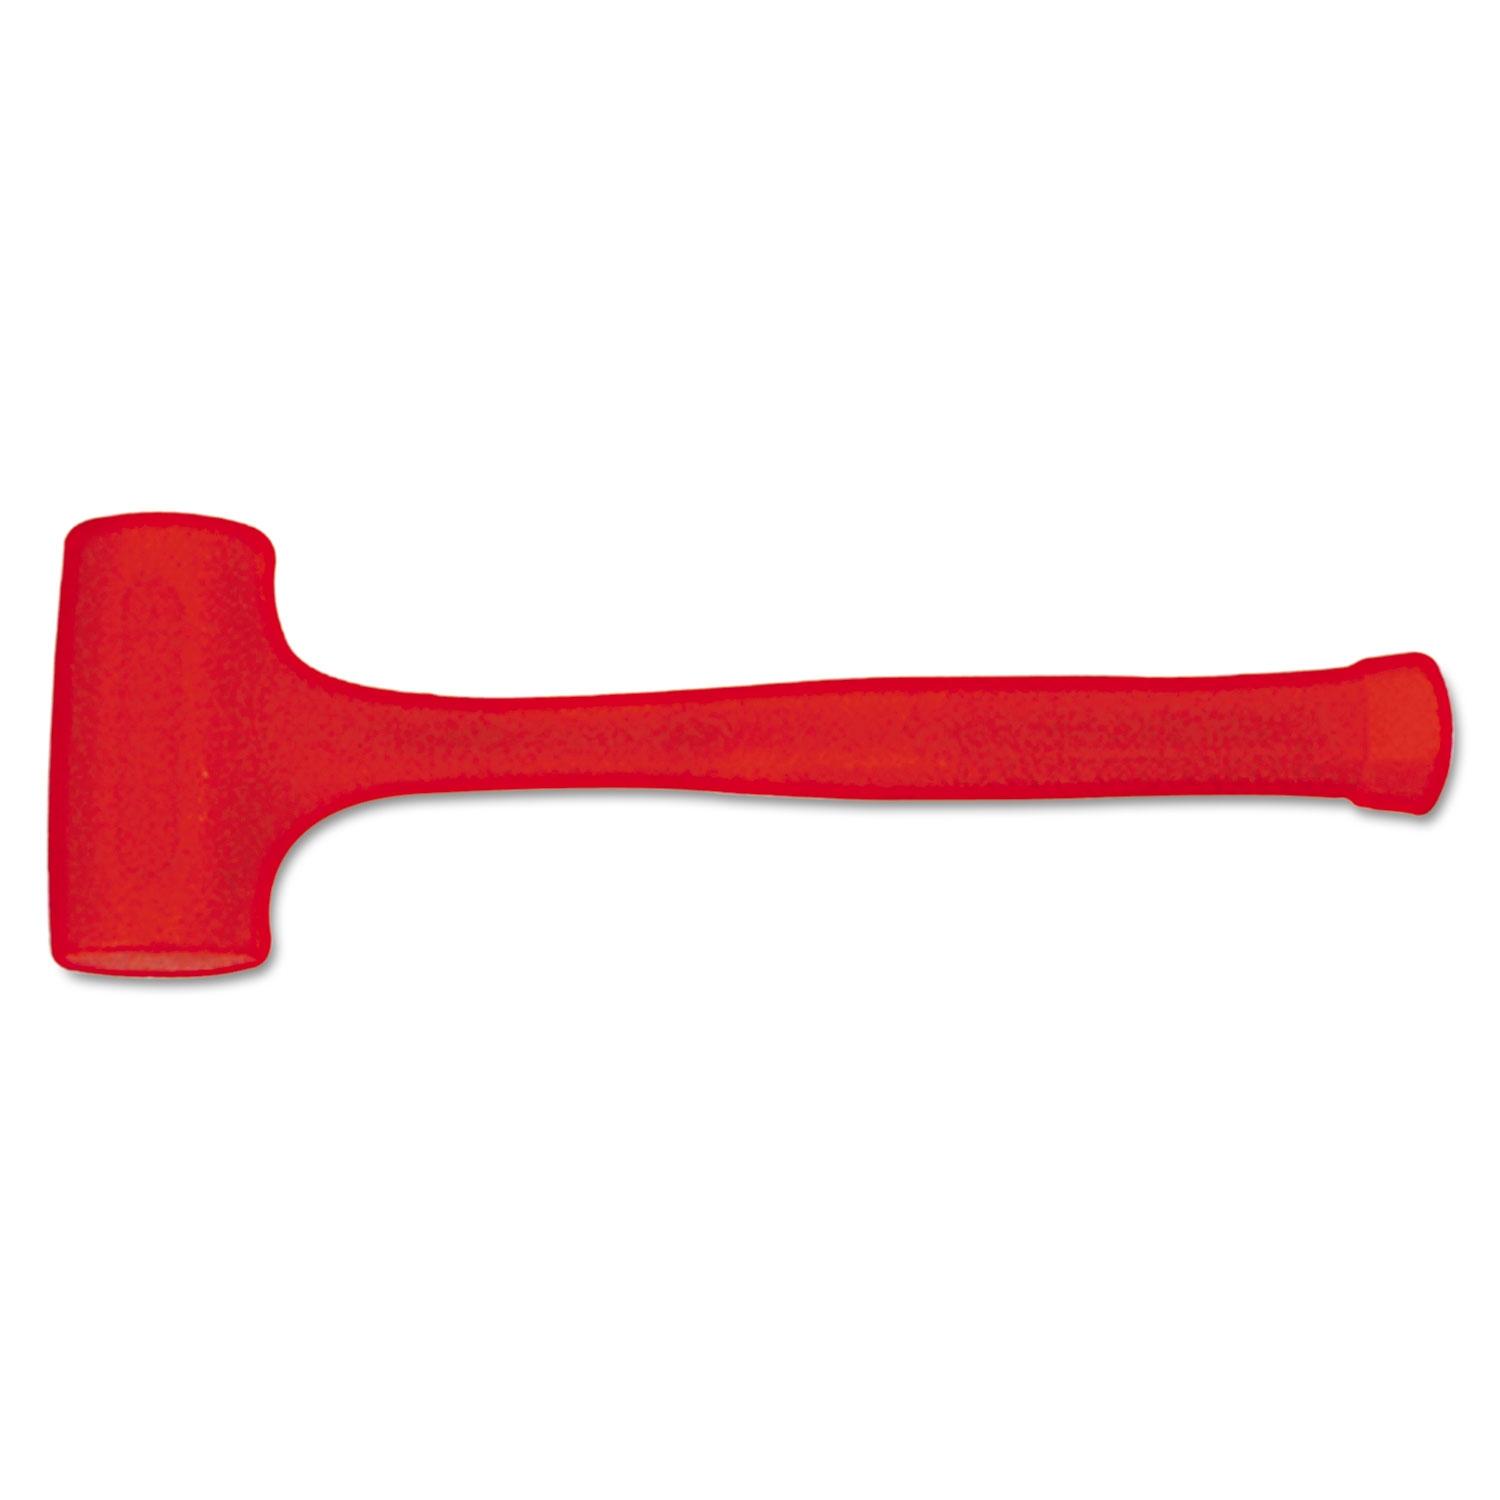 Compo-Cast Soft Face Dead-Blow Mallet, 21oz, Forged Steel Handle